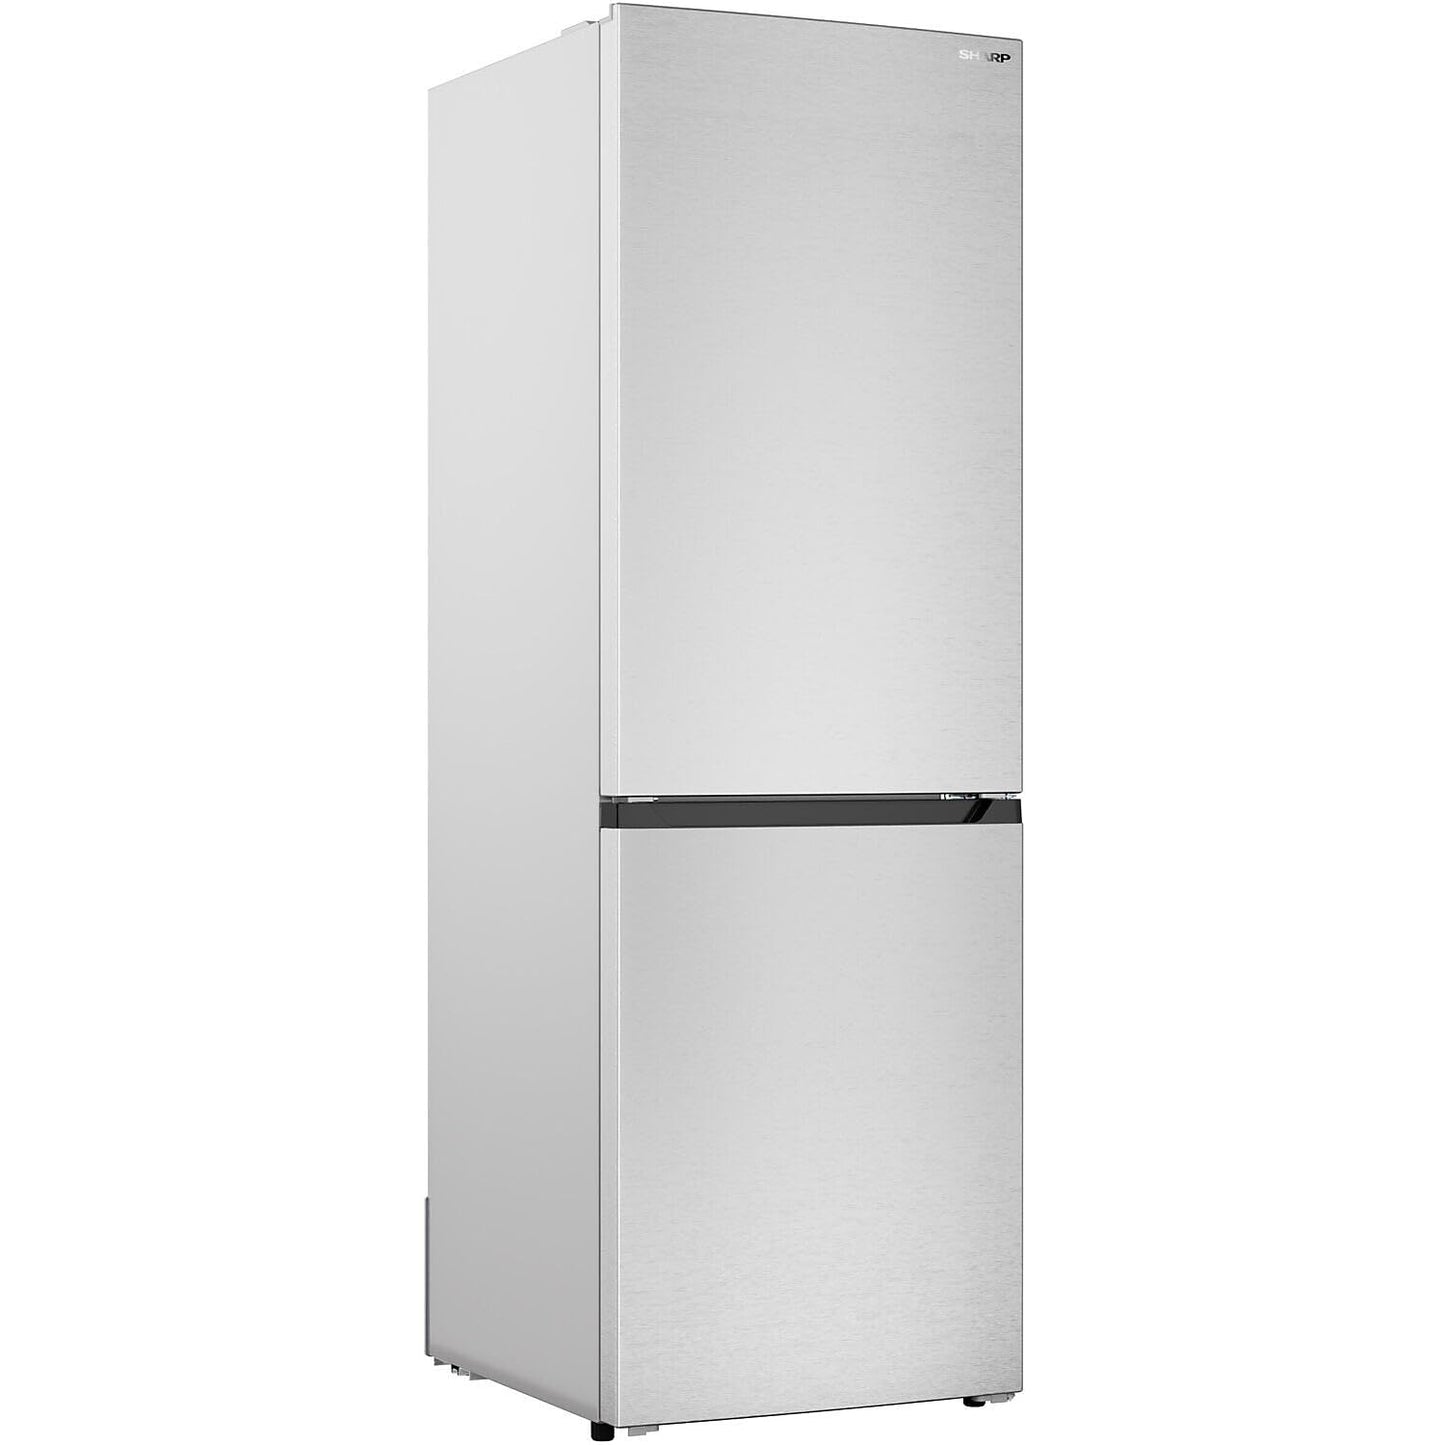 SHARP SJB1255GS Rerigerator with Bottom-Freezer, Counter-Depth, 24 Inch, 11.5 Cubic Foot, Stainless Steel